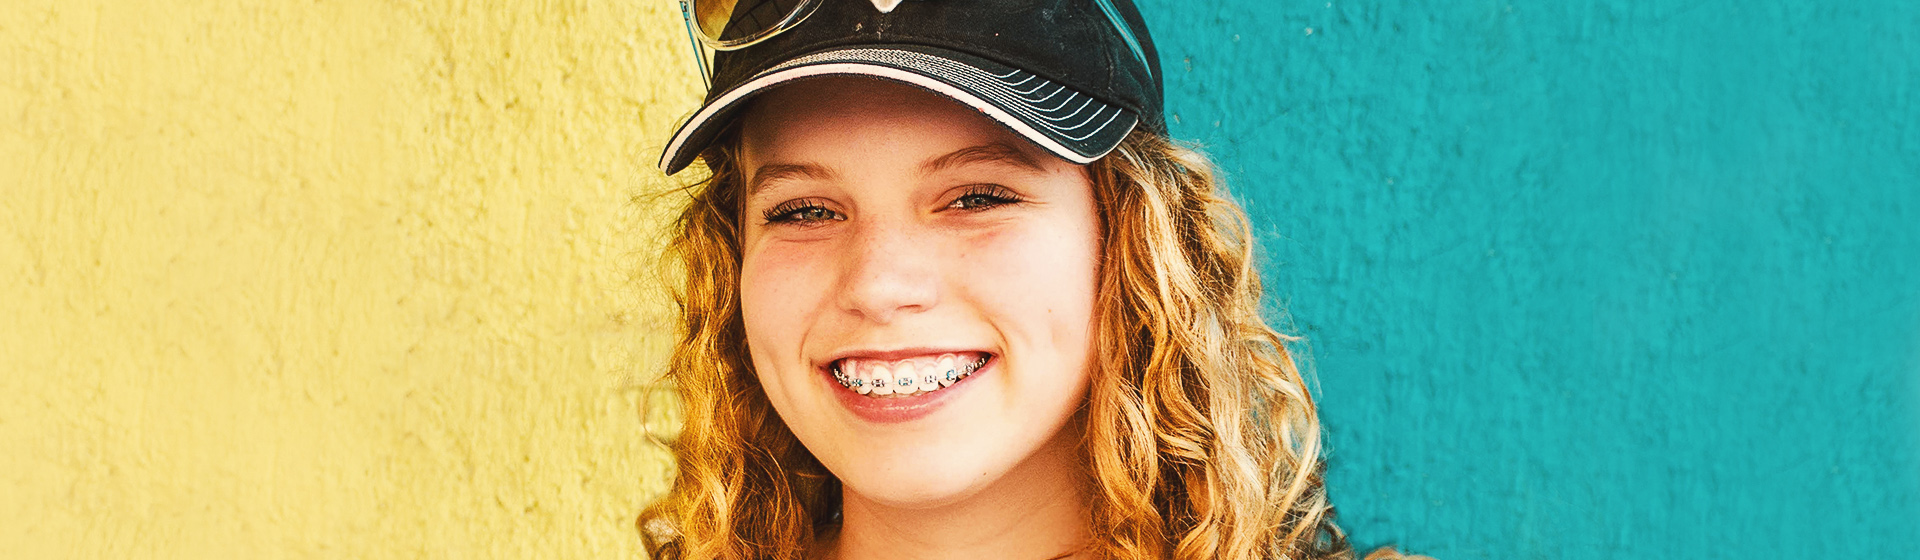 Everything You Need to Know About Caring for Braces